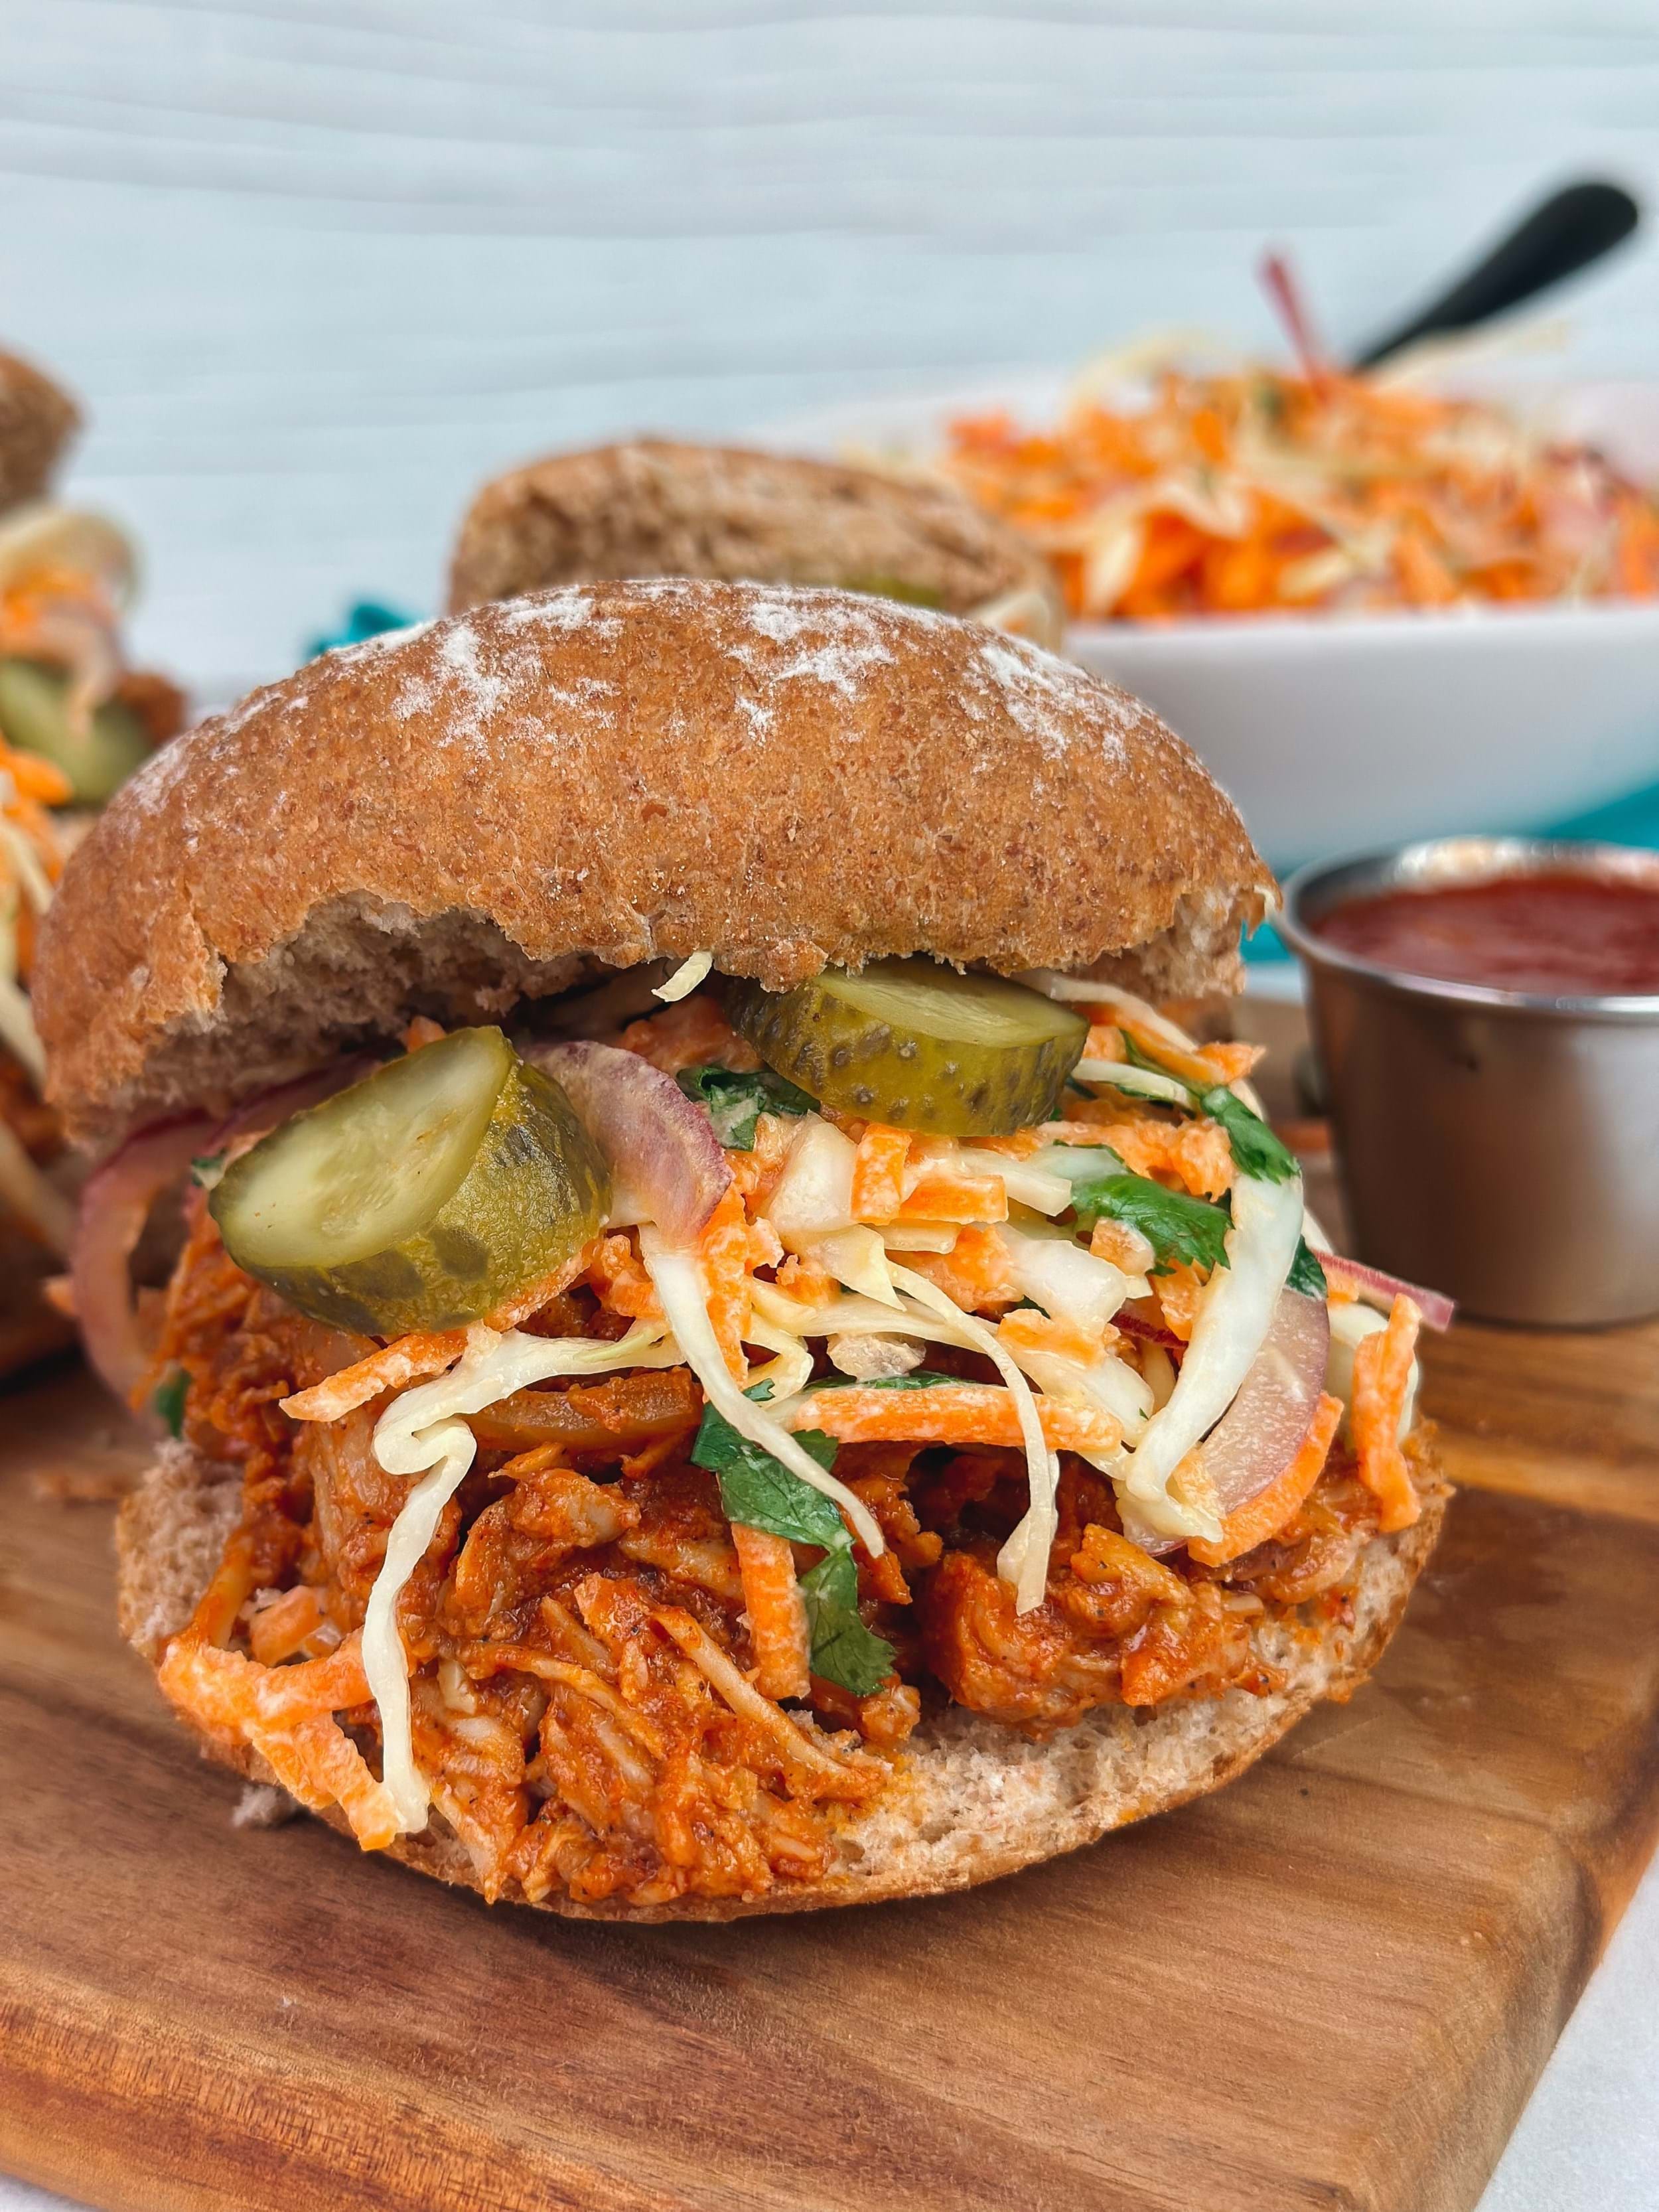 Slow Cooker Pulled Pork Burgers with Homemade Coleslaw